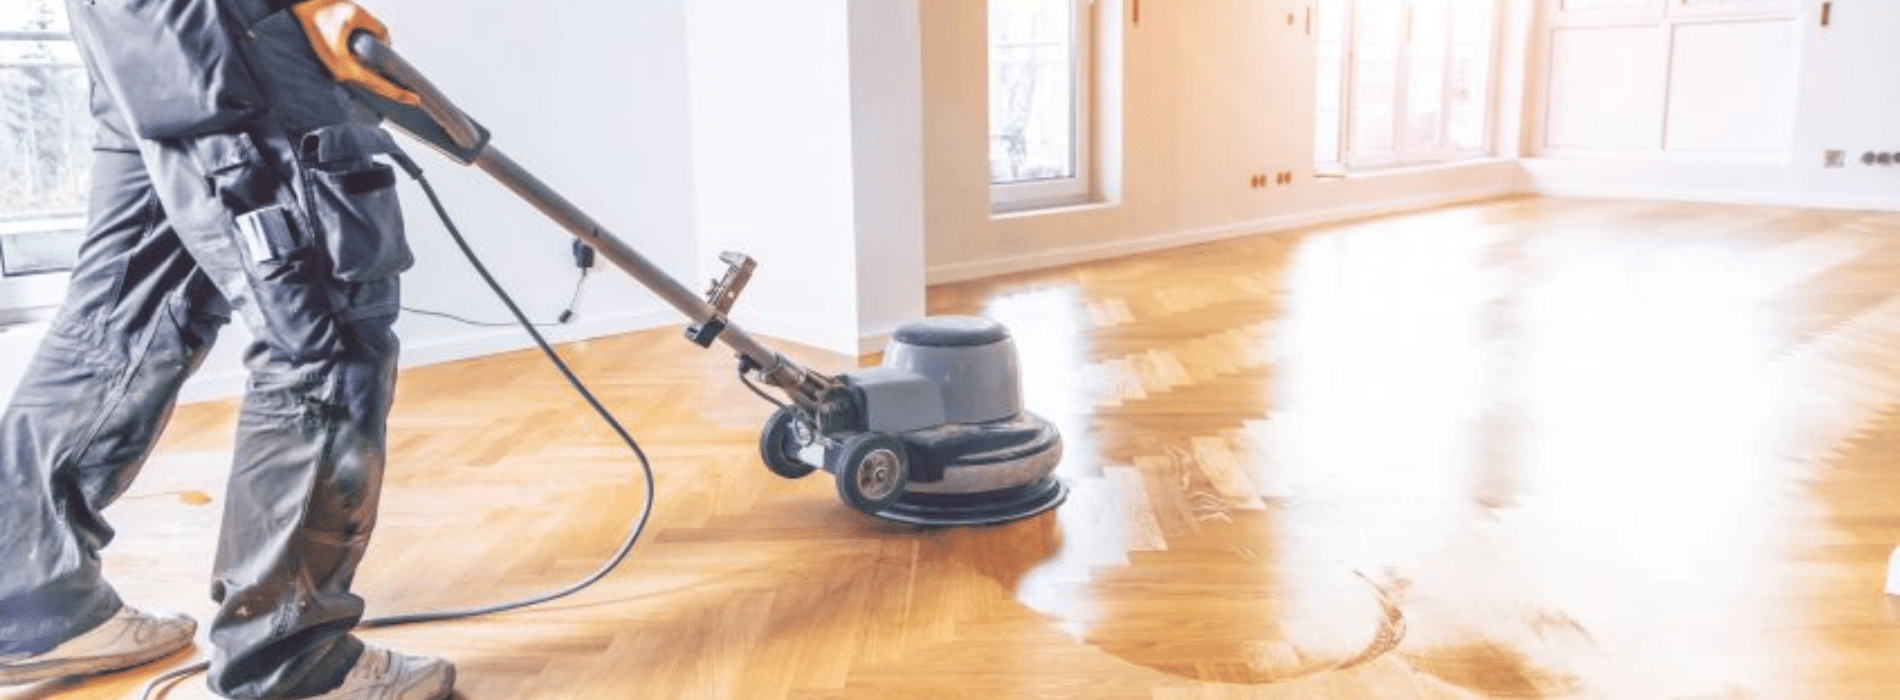 Efficient herringbone floor sanding by Mr Sander® using Bona belt sander (Effect 2200, Voltage 230, Frequency 50/60) and HEPA-filtered dust extraction. Experience the clean and flawless result on your 250x750 mm floor.